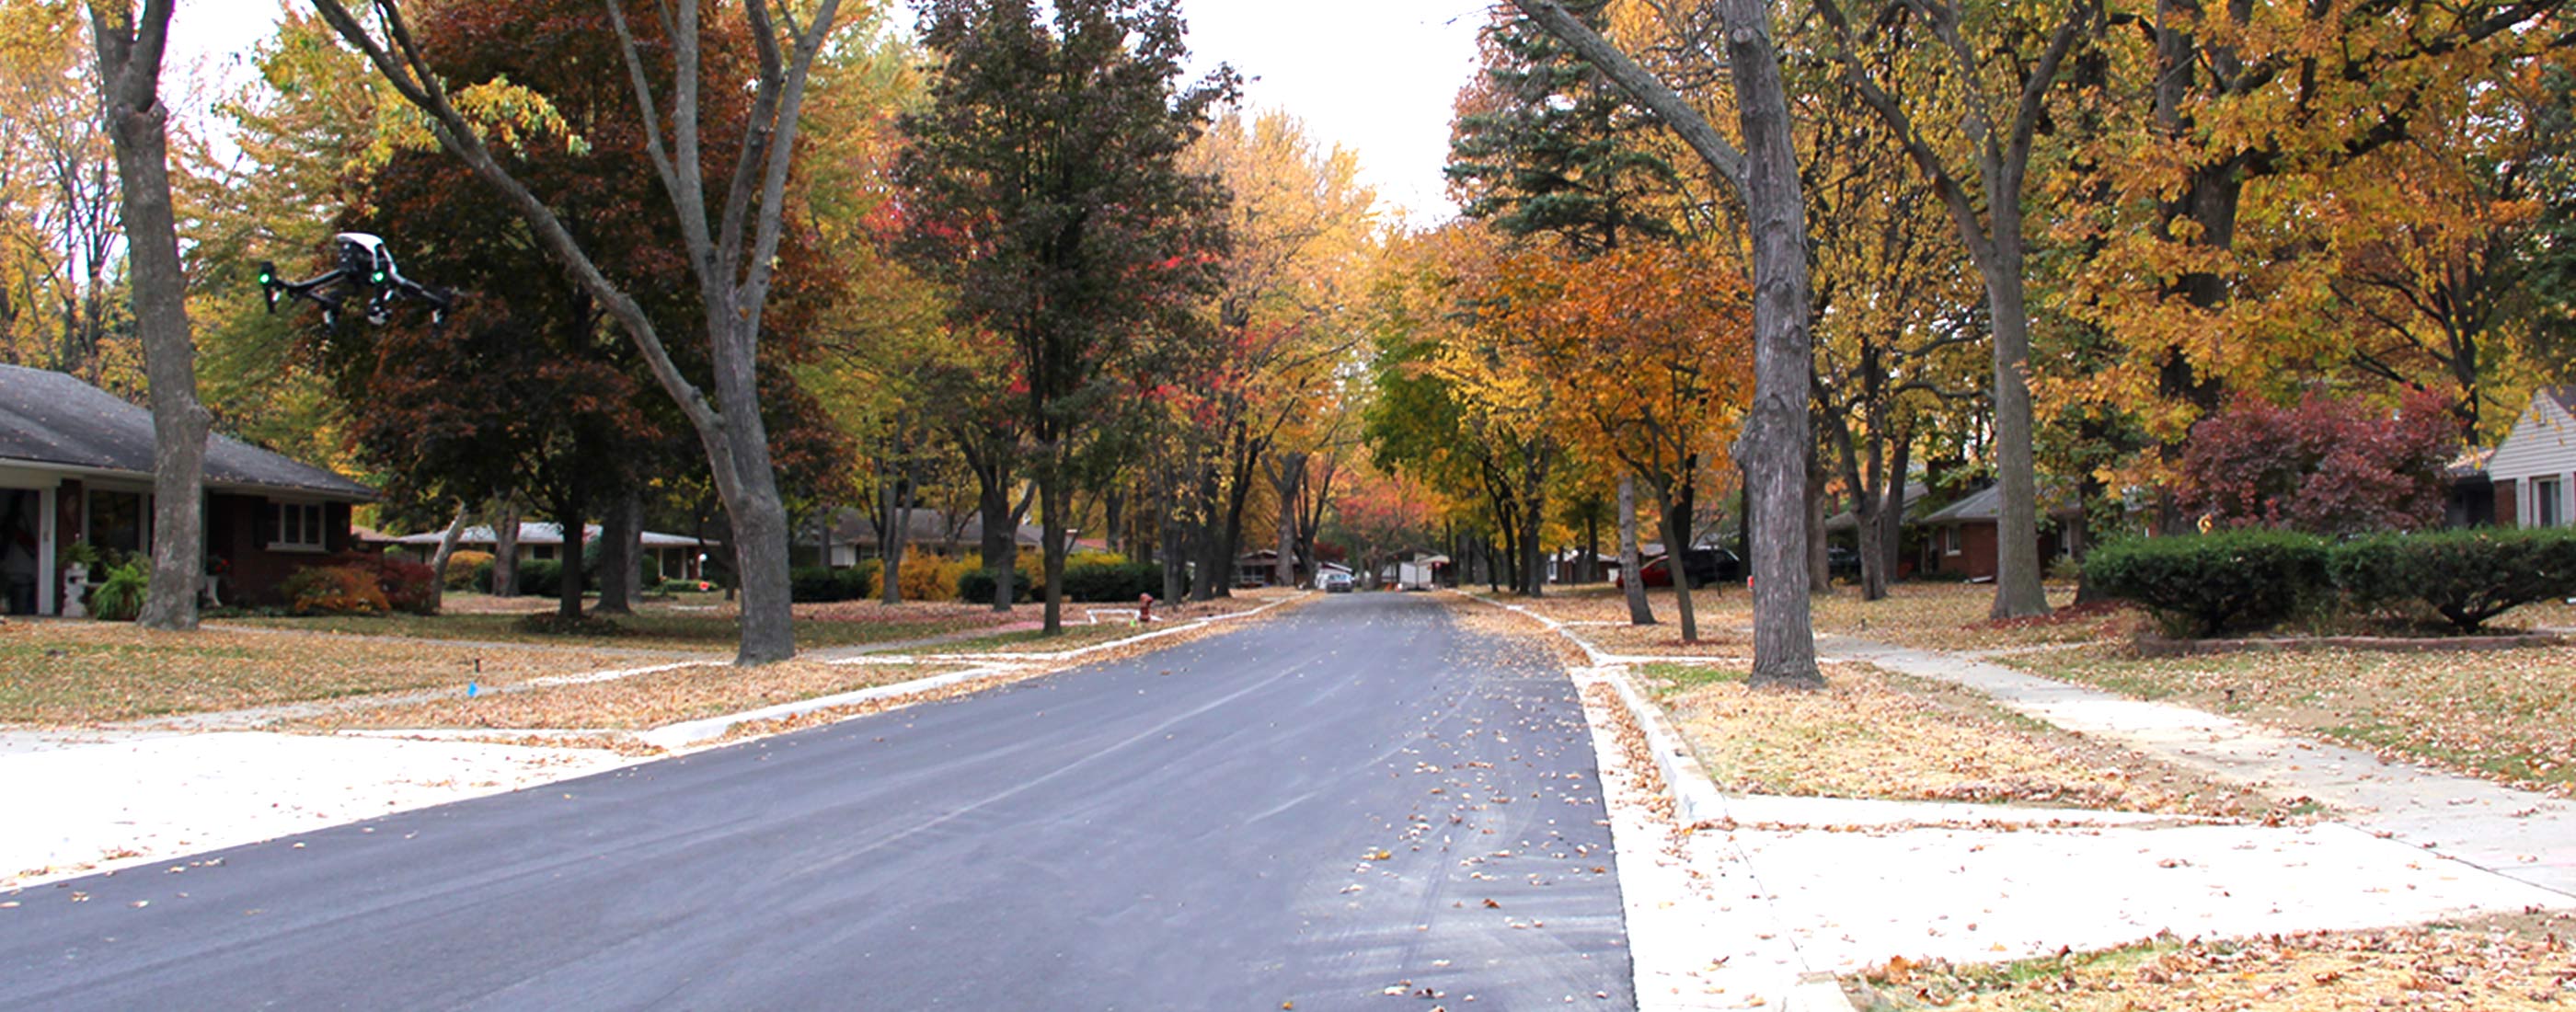 Southfield, MI worked with OHM Advisors to update water mains and corresponding pavement upgrades within the Evergreen Trail Subdivision.